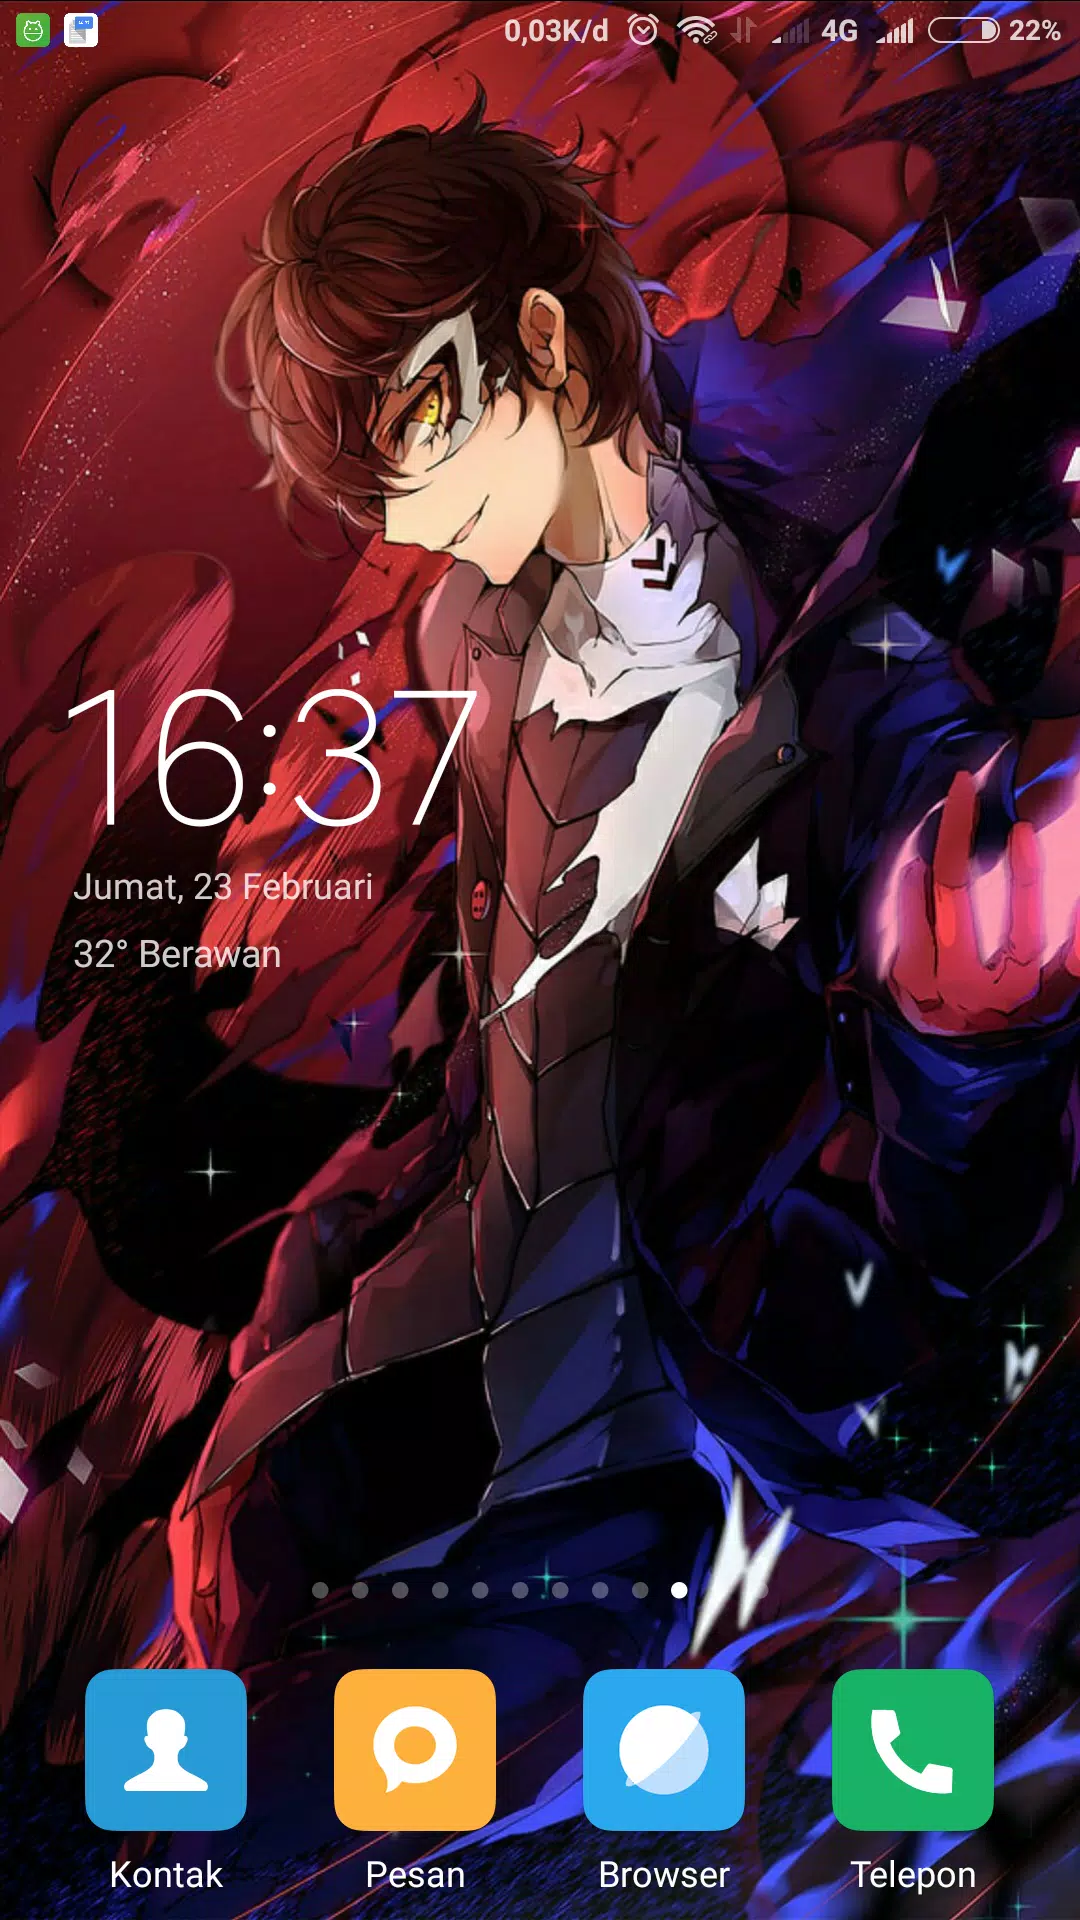 Persona fansart the animation wallpaper apk for android download